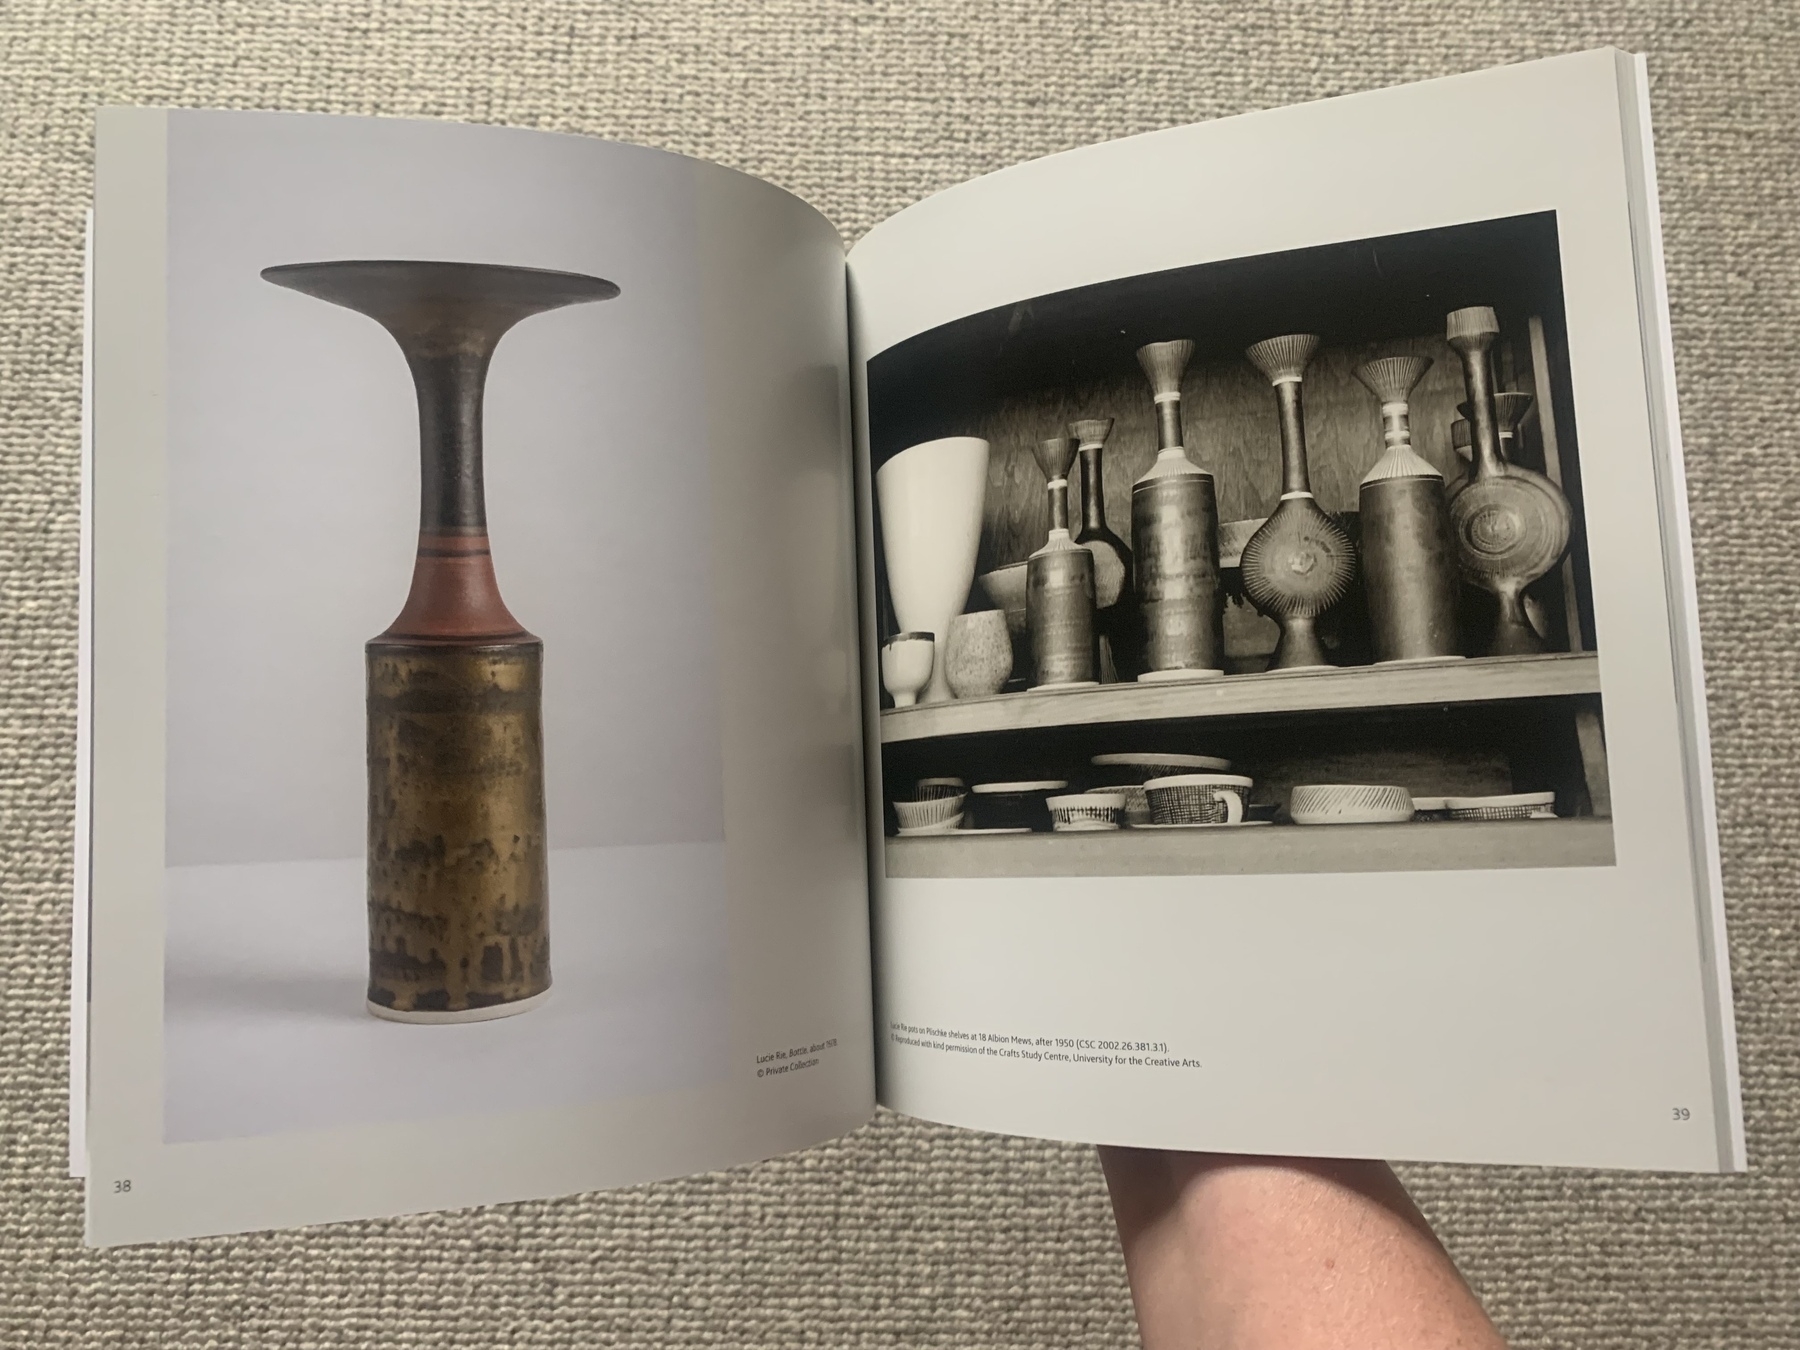 Double spread of an open book featuring two photographs of ceramic vases made by Lucy Rie.